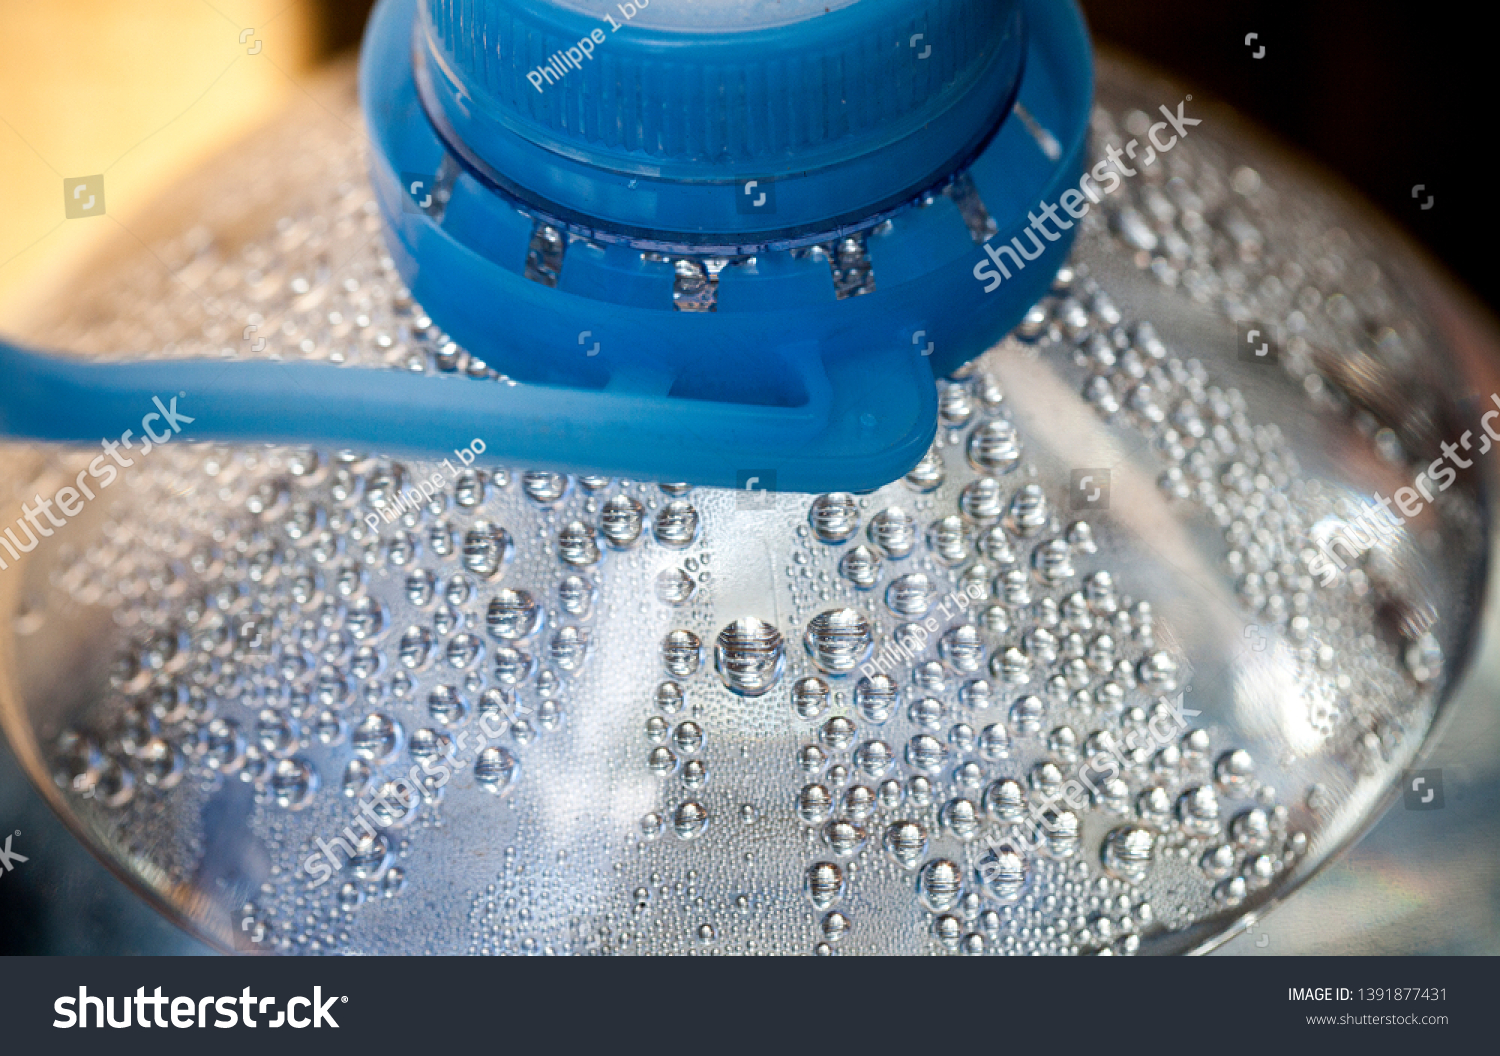 Download Condensation Water Plastic Bottle Exposed Sun Backgrounds Textures Stock Image 1391877431 PSD Mockup Templates